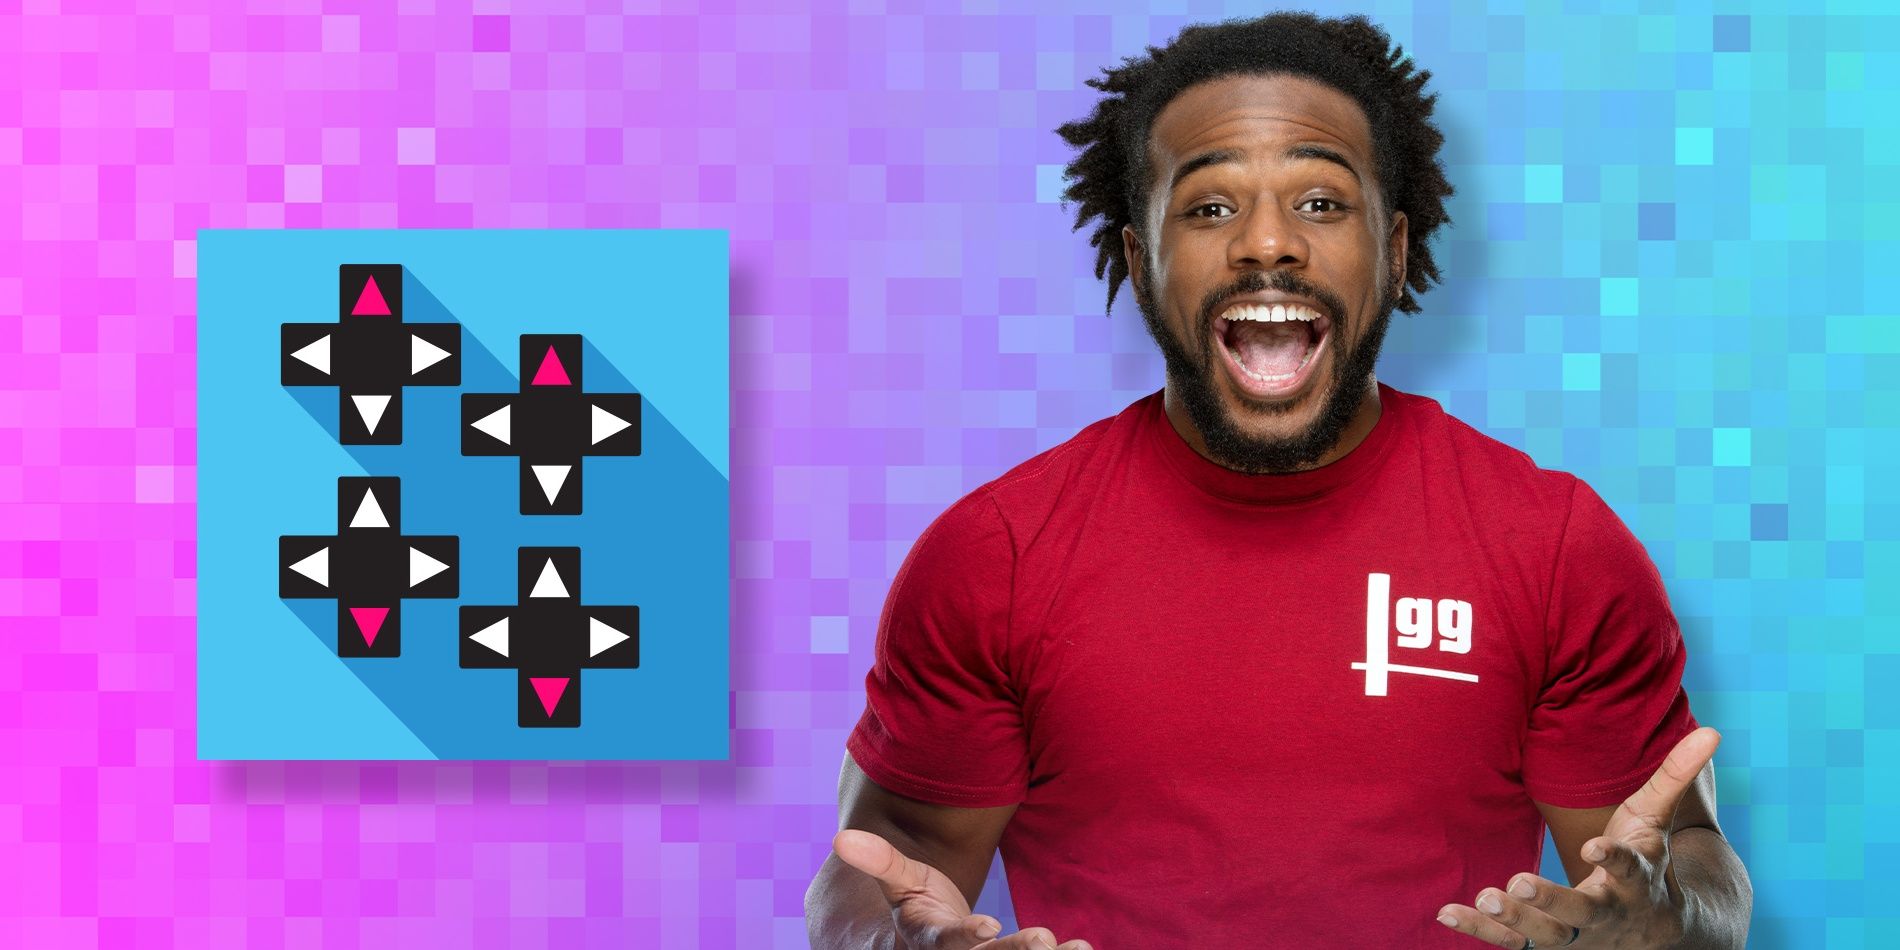 10 Best Celebrity Gaming YouTube Channels Ranked